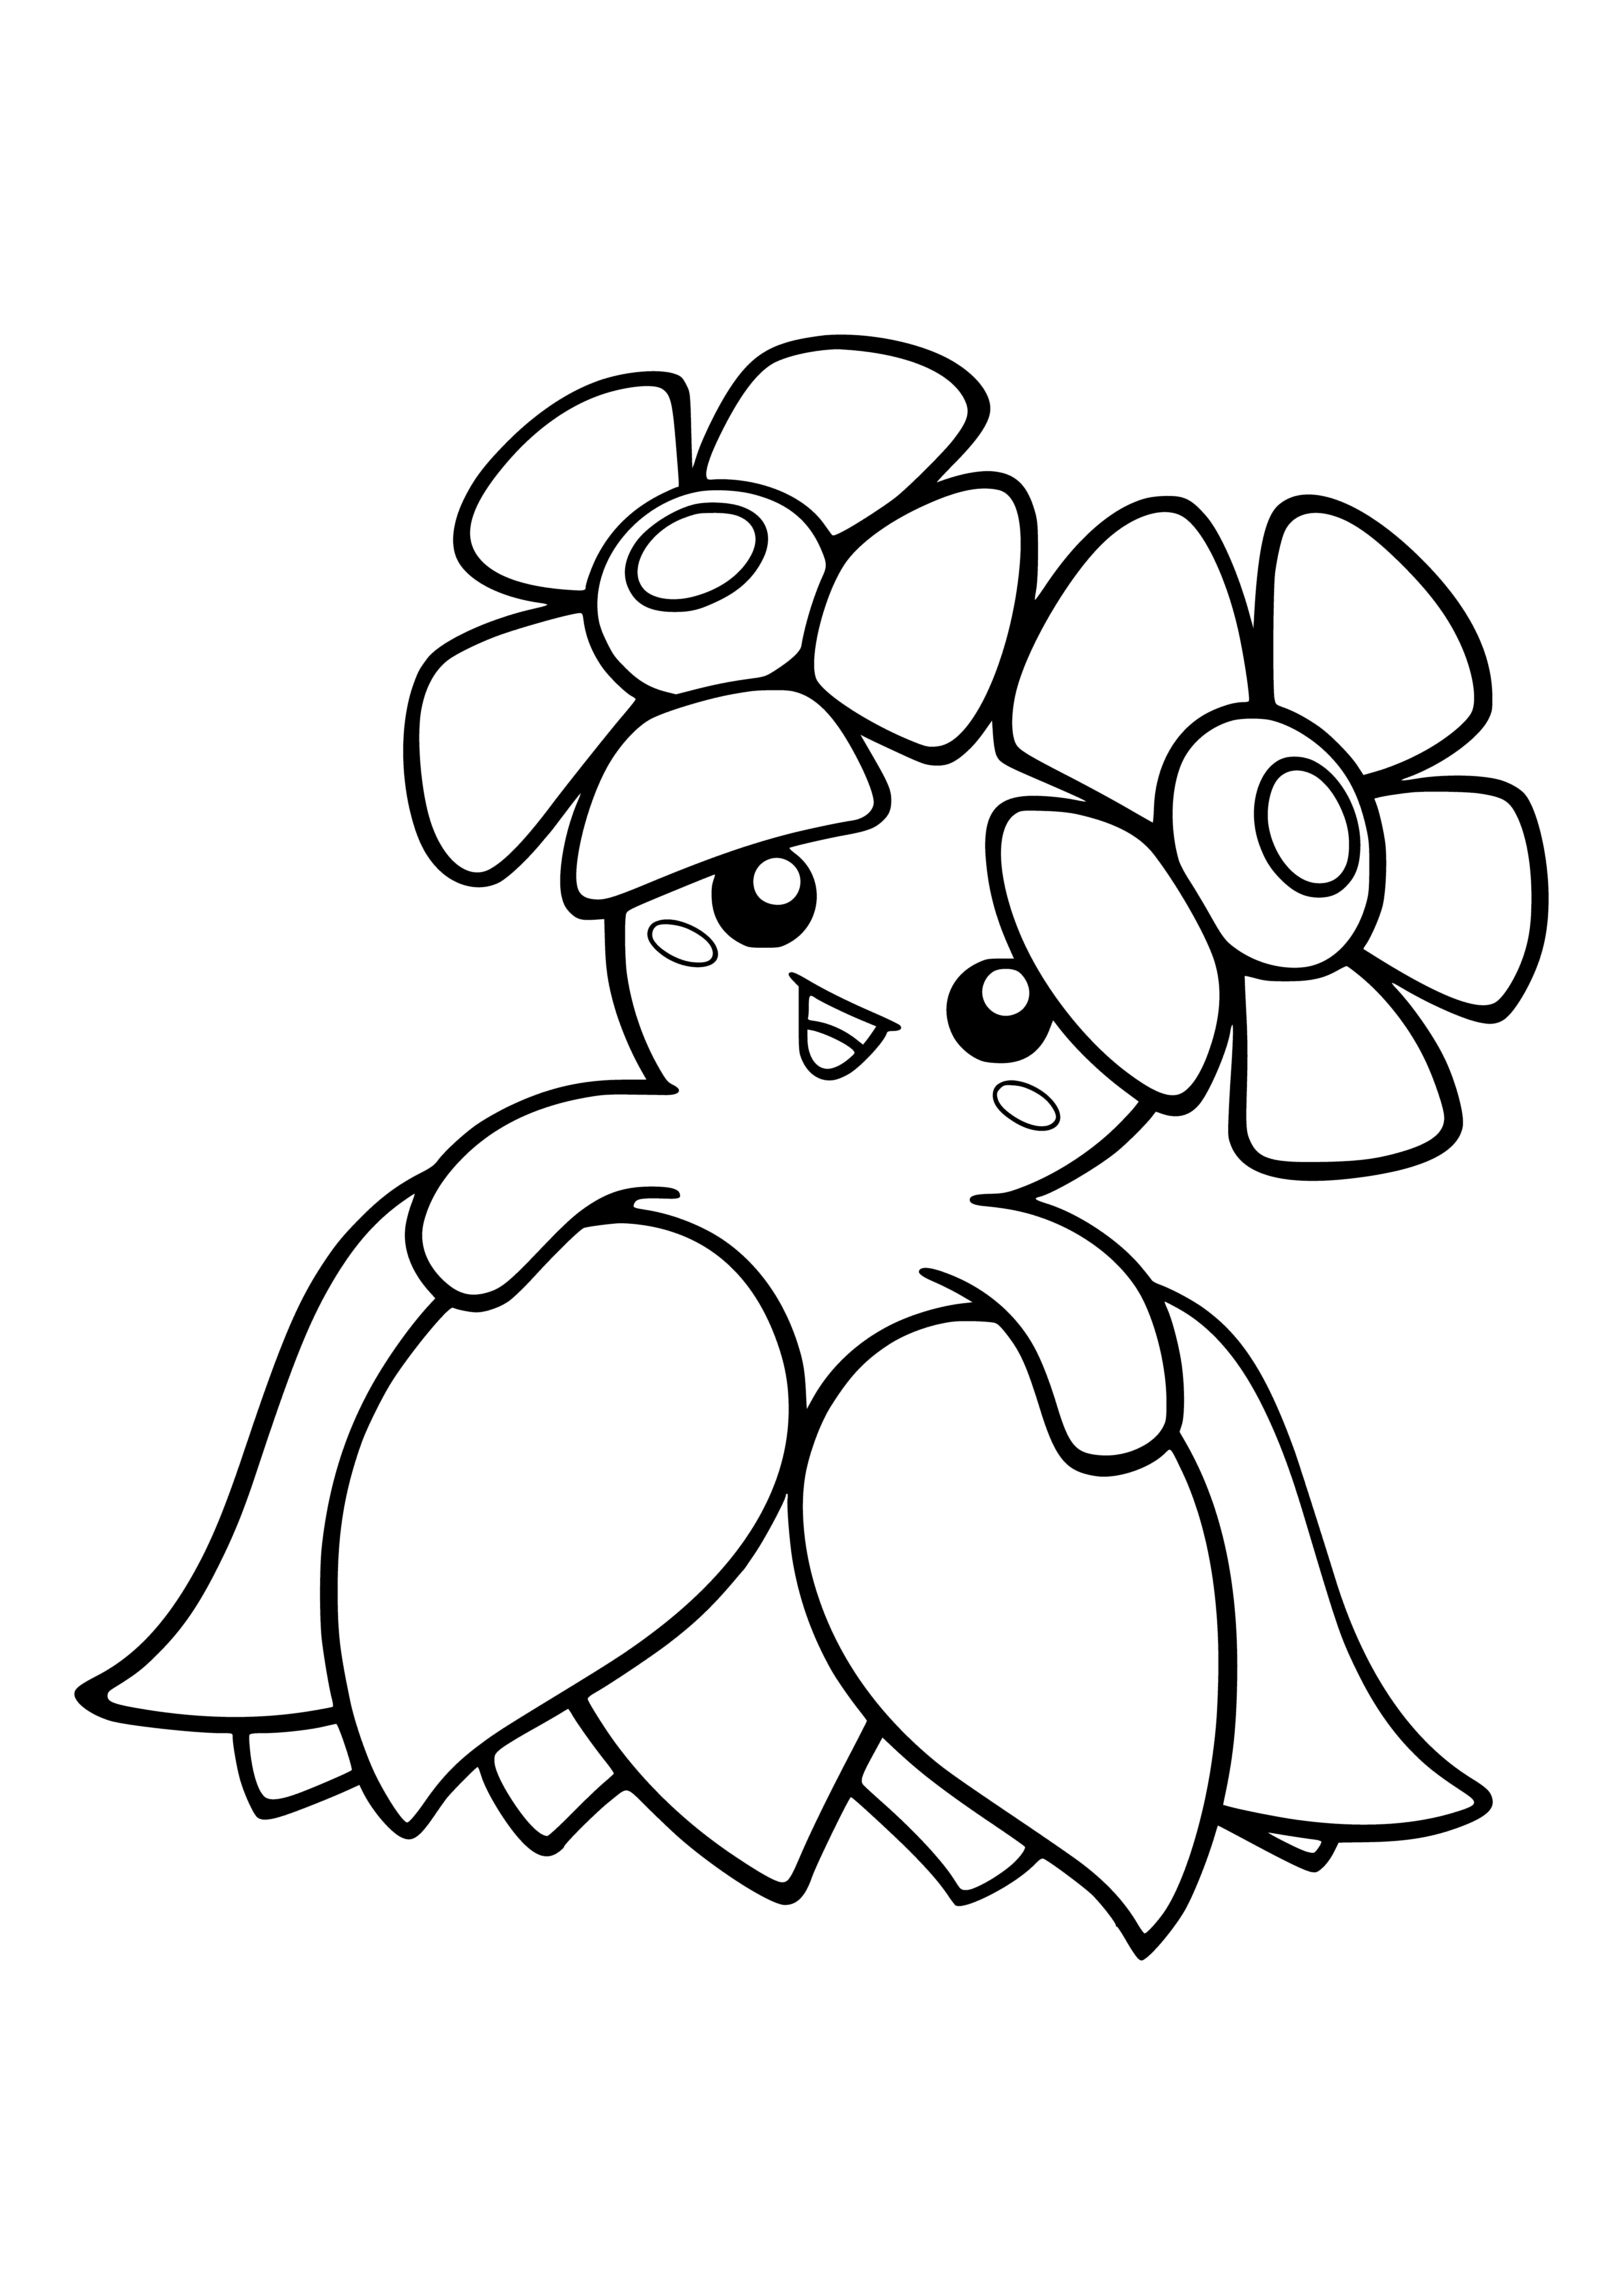 coloring page: Bellossom is a flowery Pokemon with blue eyes & pink/white petals. Its body is green with a long stem & leaves; it evolves from Gloom.